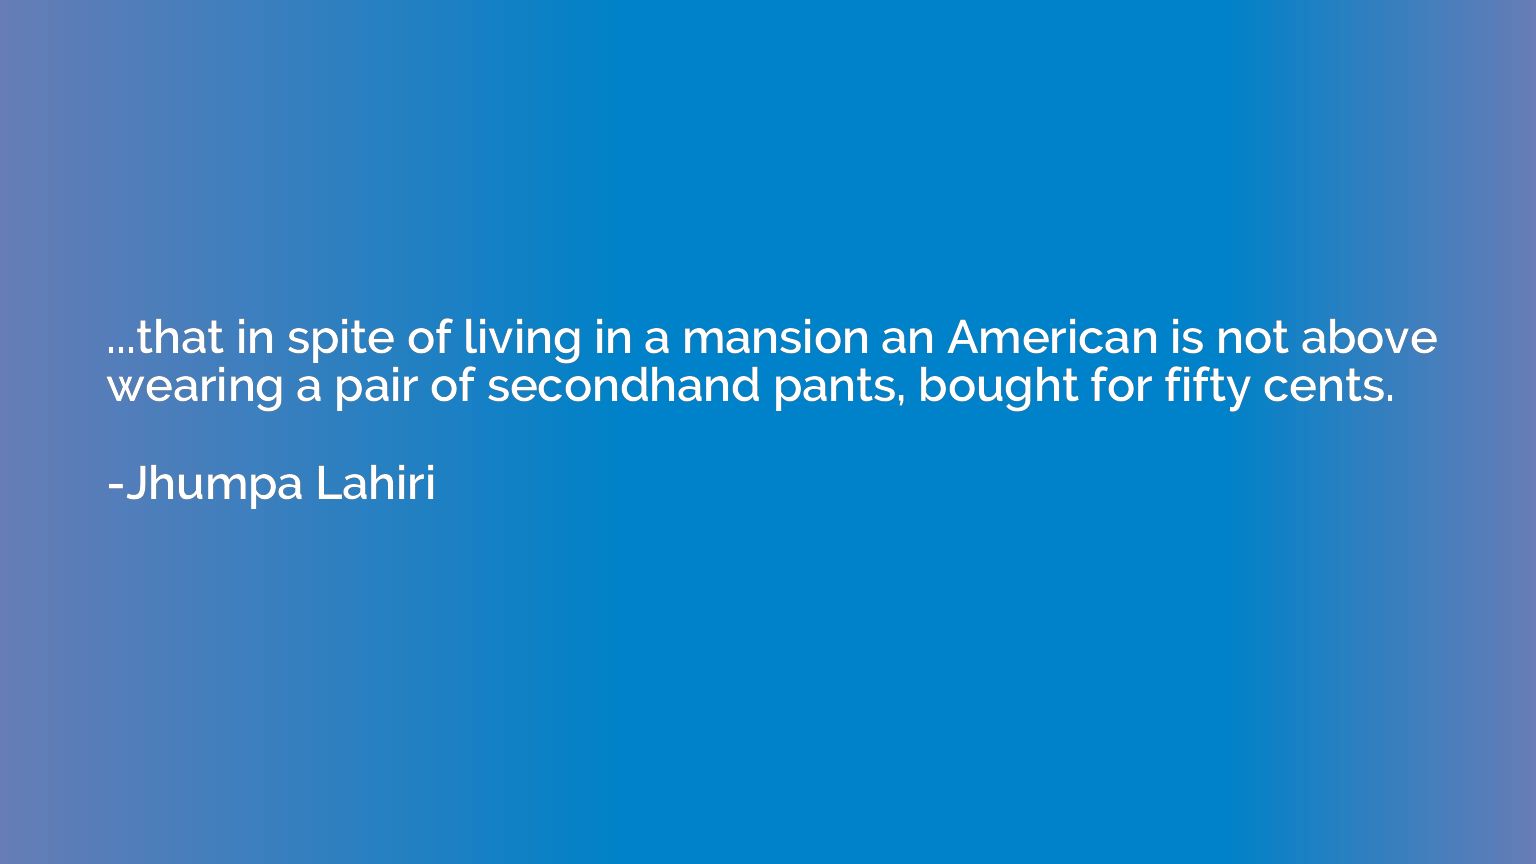 ...that in spite of living in a mansion an American is not a